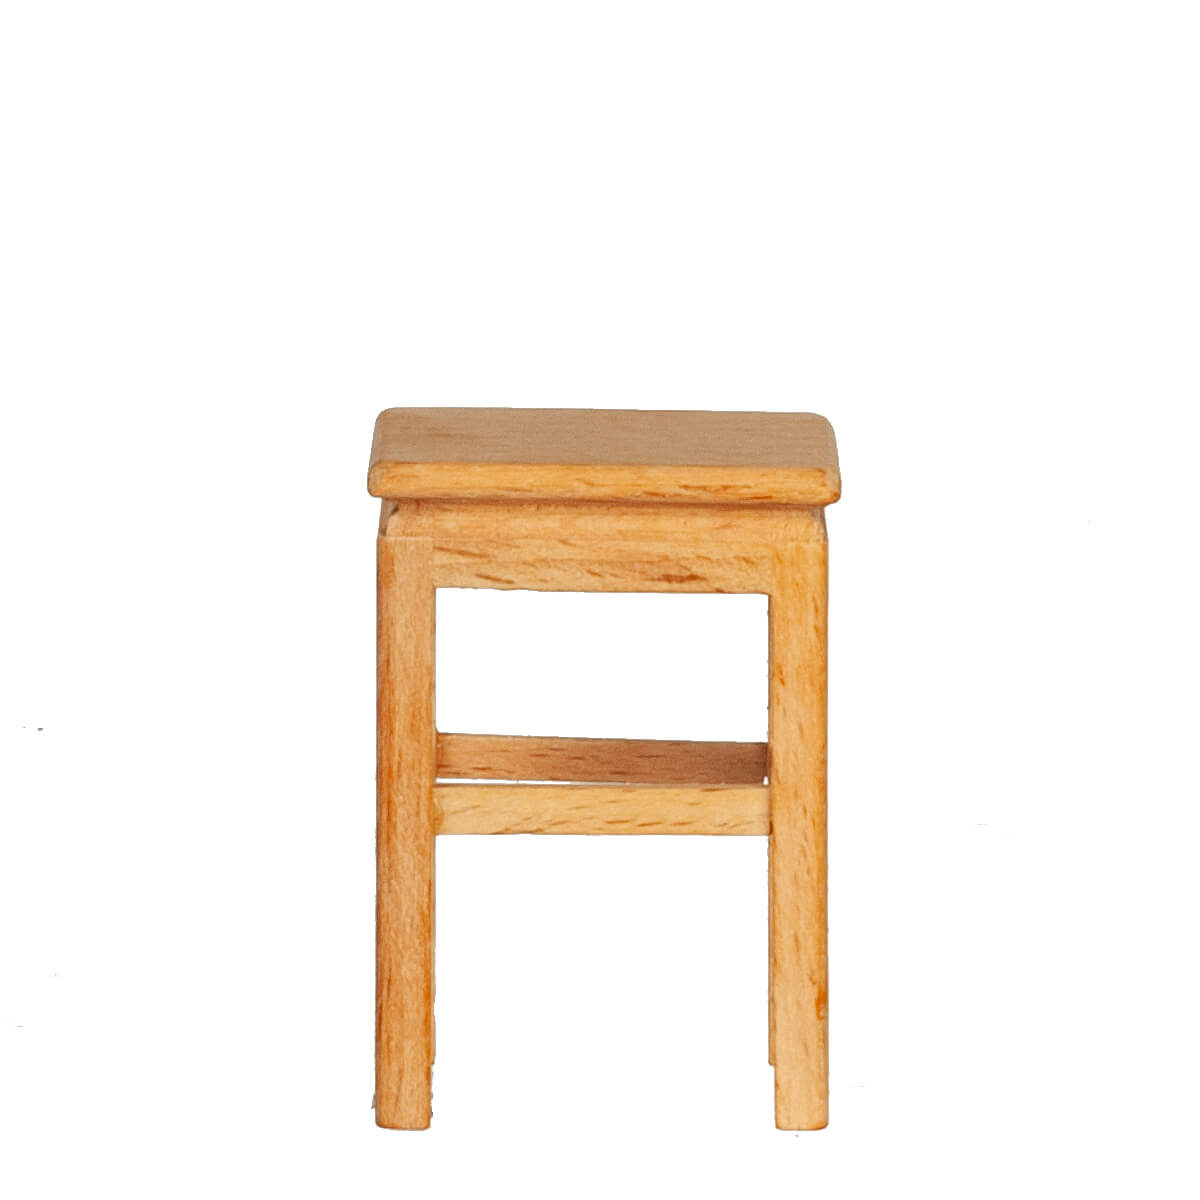 Tall Stool - Unfinished